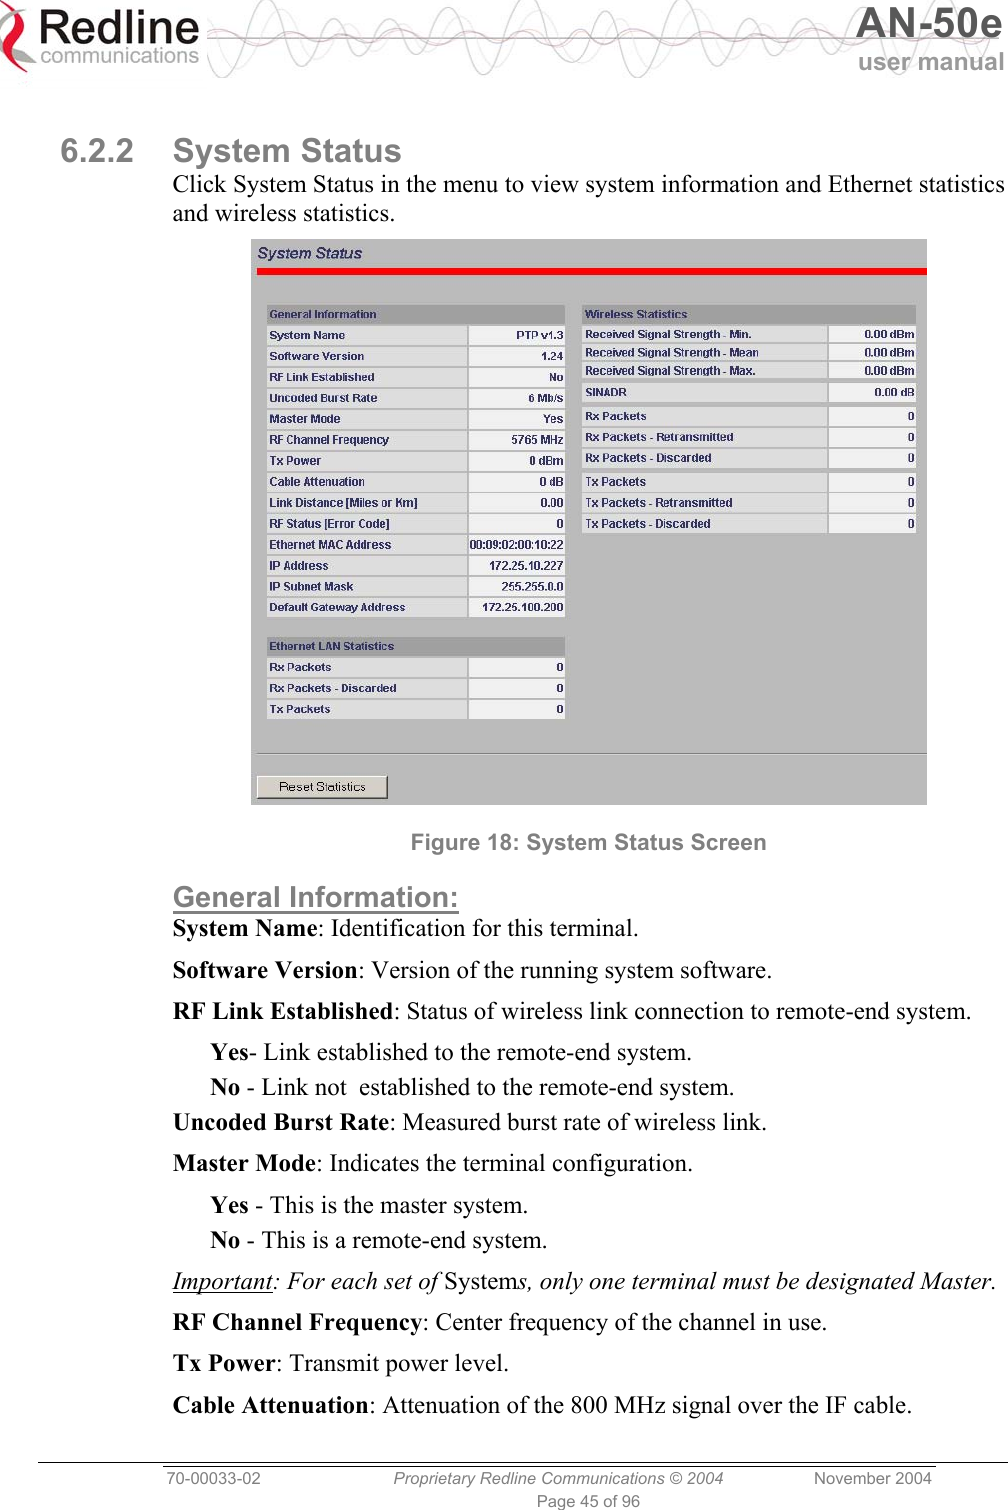   AN-50e user manual  70-00033-02  Proprietary Redline Communications © 2004 November 2004 Page 45 of 96  6.2.2 System Status Click System Status in the menu to view system information and Ethernet statistics and wireless statistics.  Figure 18: System Status Screen General Information: System Name: Identification for this terminal. Software Version: Version of the running system software. RF Link Established: Status of wireless link connection to remote-end system. Yes- Link established to the remote-end system. No - Link not  established to the remote-end system. Uncoded Burst Rate: Measured burst rate of wireless link. Master Mode: Indicates the terminal configuration. Yes - This is the master system. No - This is a remote-end system. Important: For each set of Systems, only one terminal must be designated Master. RF Channel Frequency: Center frequency of the channel in use. Tx Power: Transmit power level. Cable Attenuation: Attenuation of the 800 MHz signal over the IF cable. 